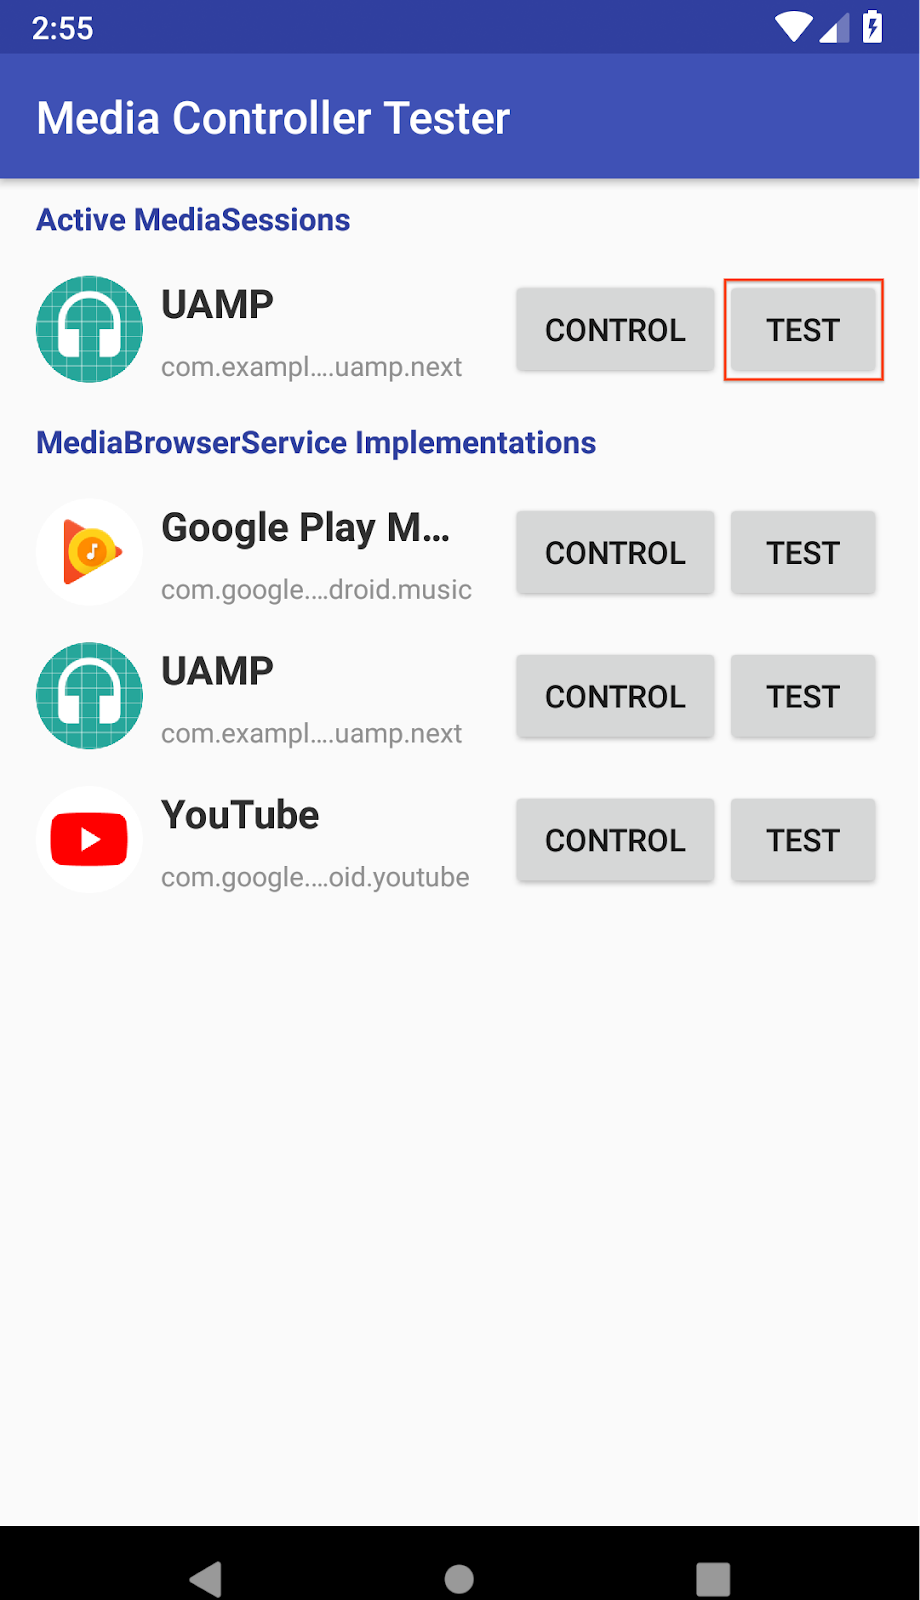 MCT Screenshot of launch screen; contains a list of installed media apps, with an option to go to either the Control or Test view for each.